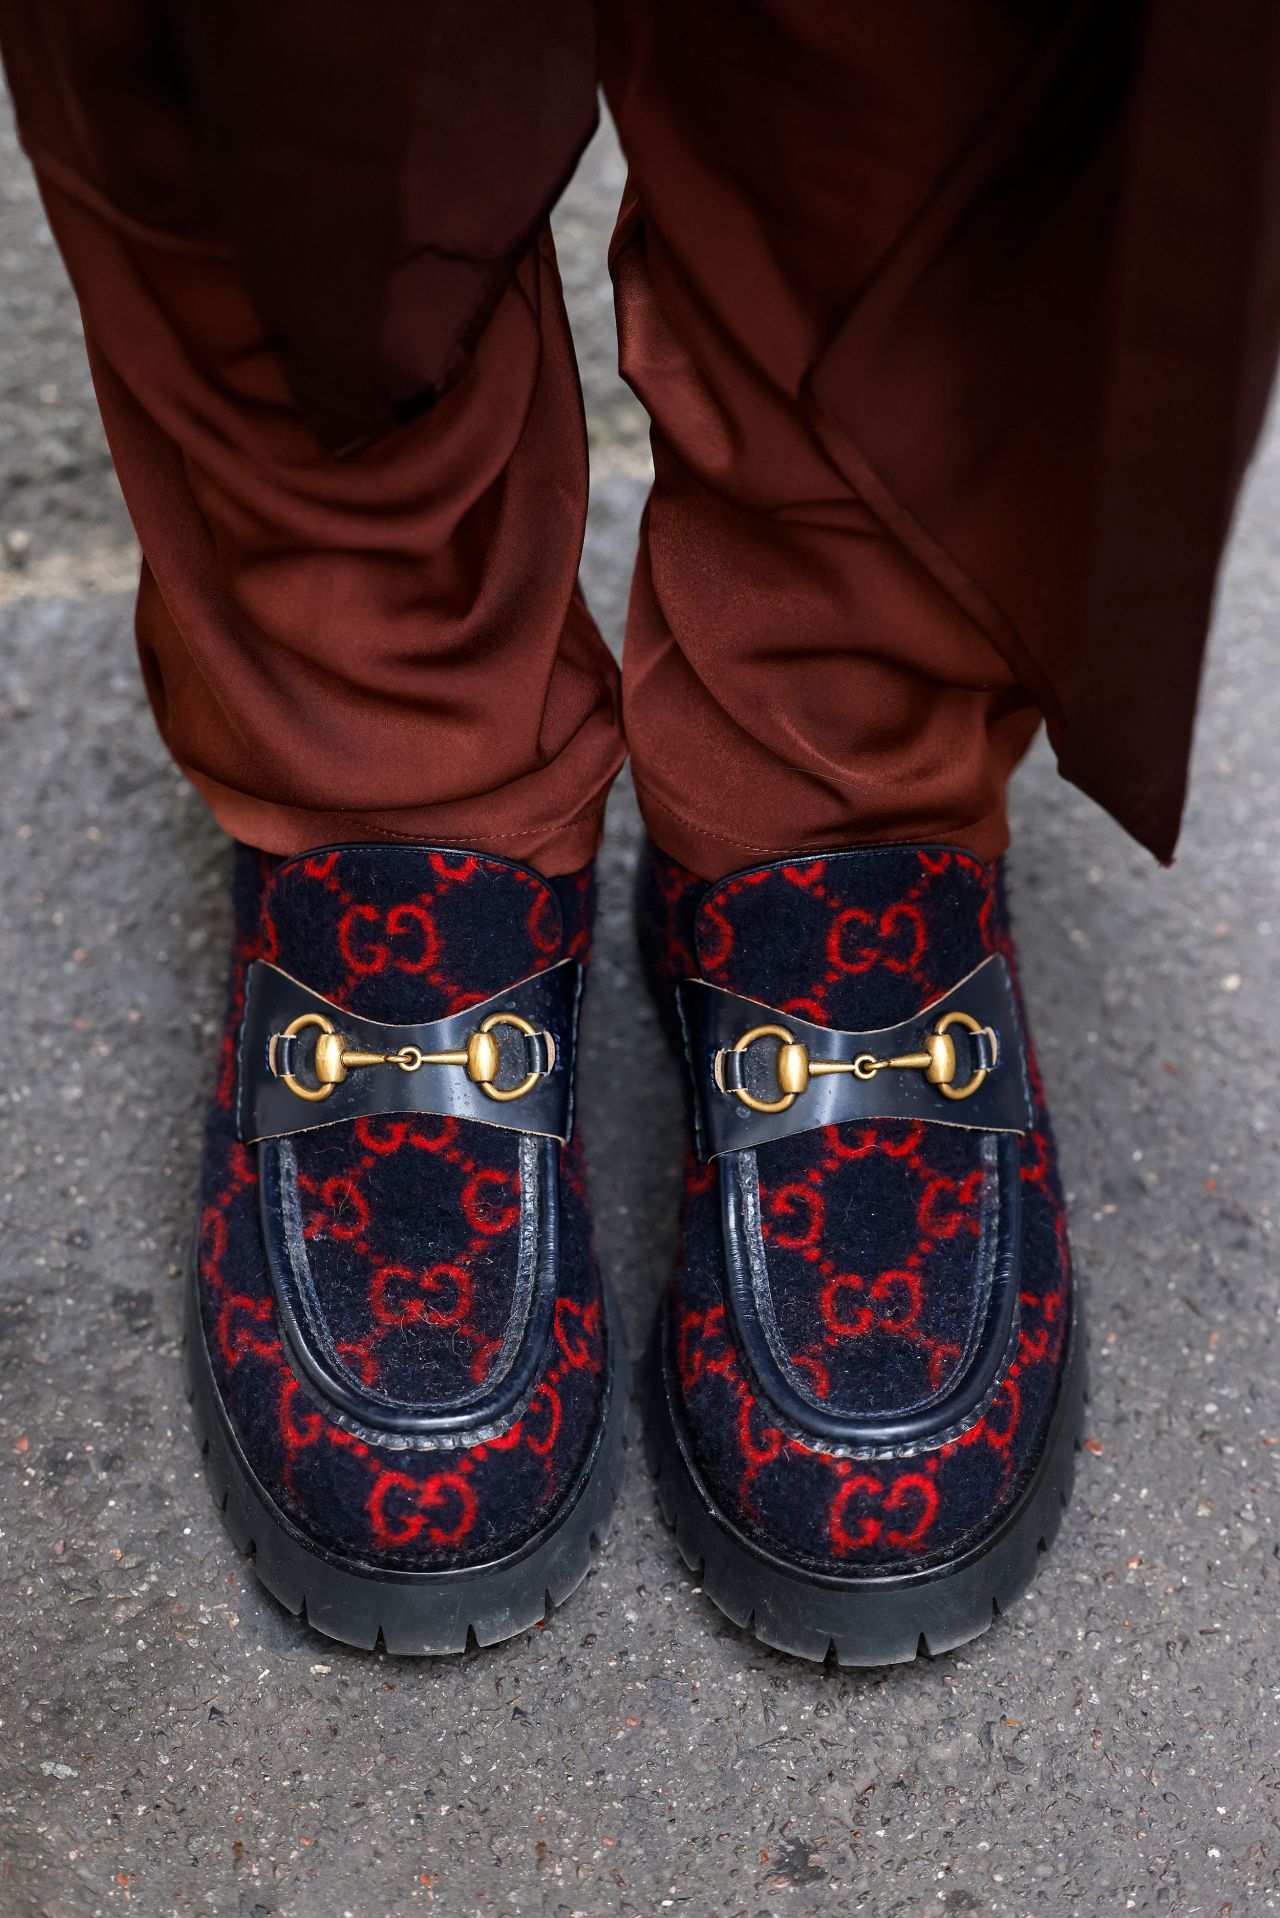 PARIS, FRANCE - MARCH 01: Influencer Justus Toussis wearing blue and red GG Supreme wool horsebit bee lug shoes by Gucci, seen during Paris Fashion Week Fall/Winter 22/23 on March 1, 2022 in Paris, France.